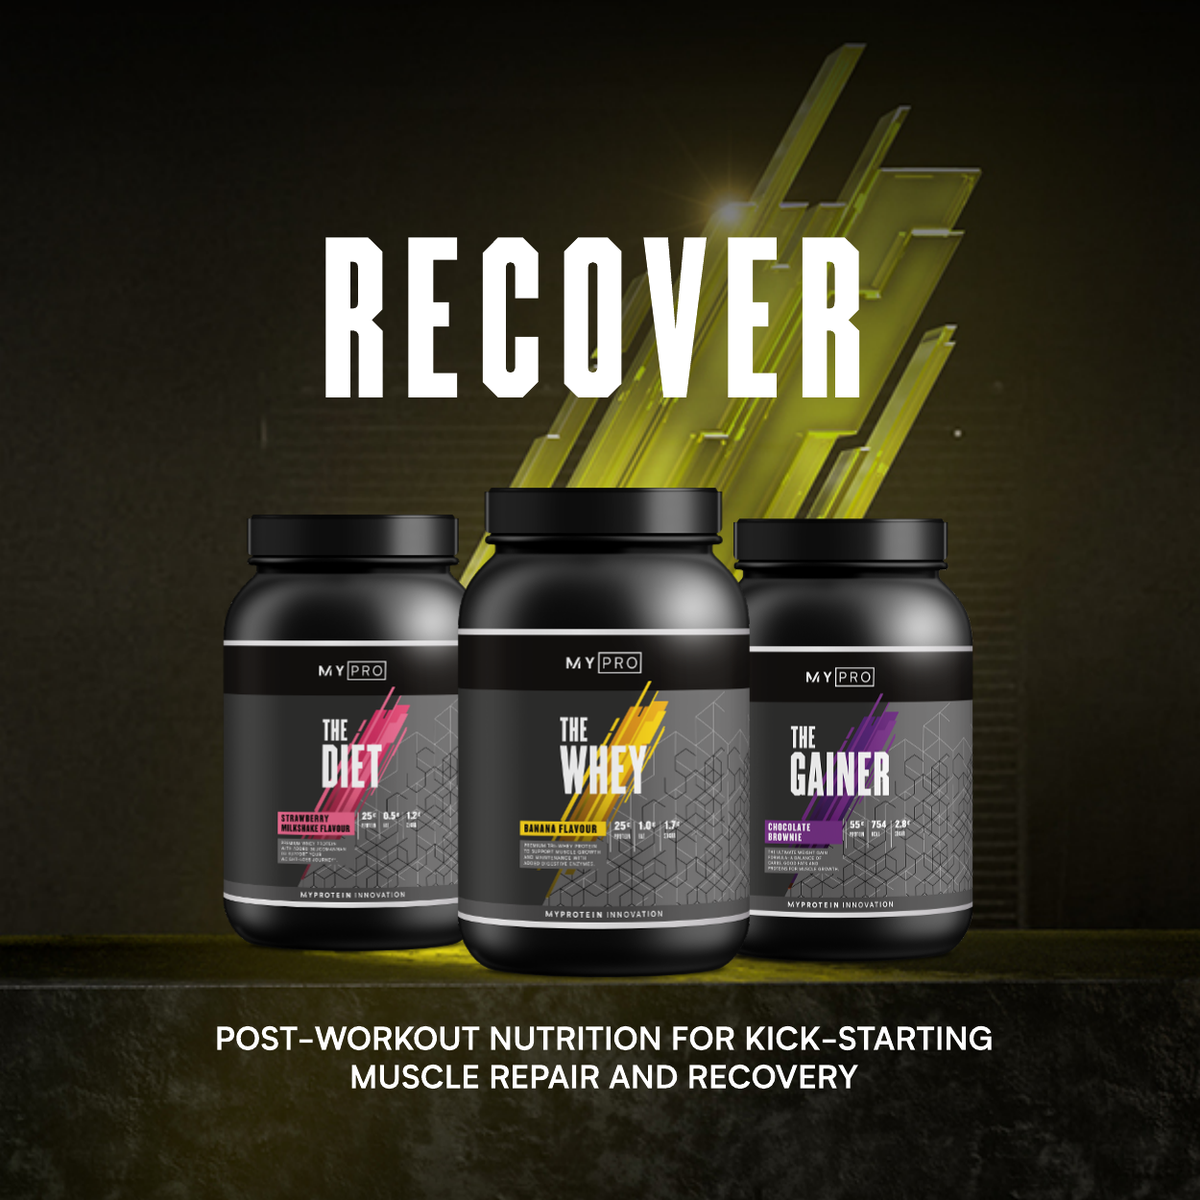 Recover. Post-workout nutrition for kick-starting muscle repair and recovery